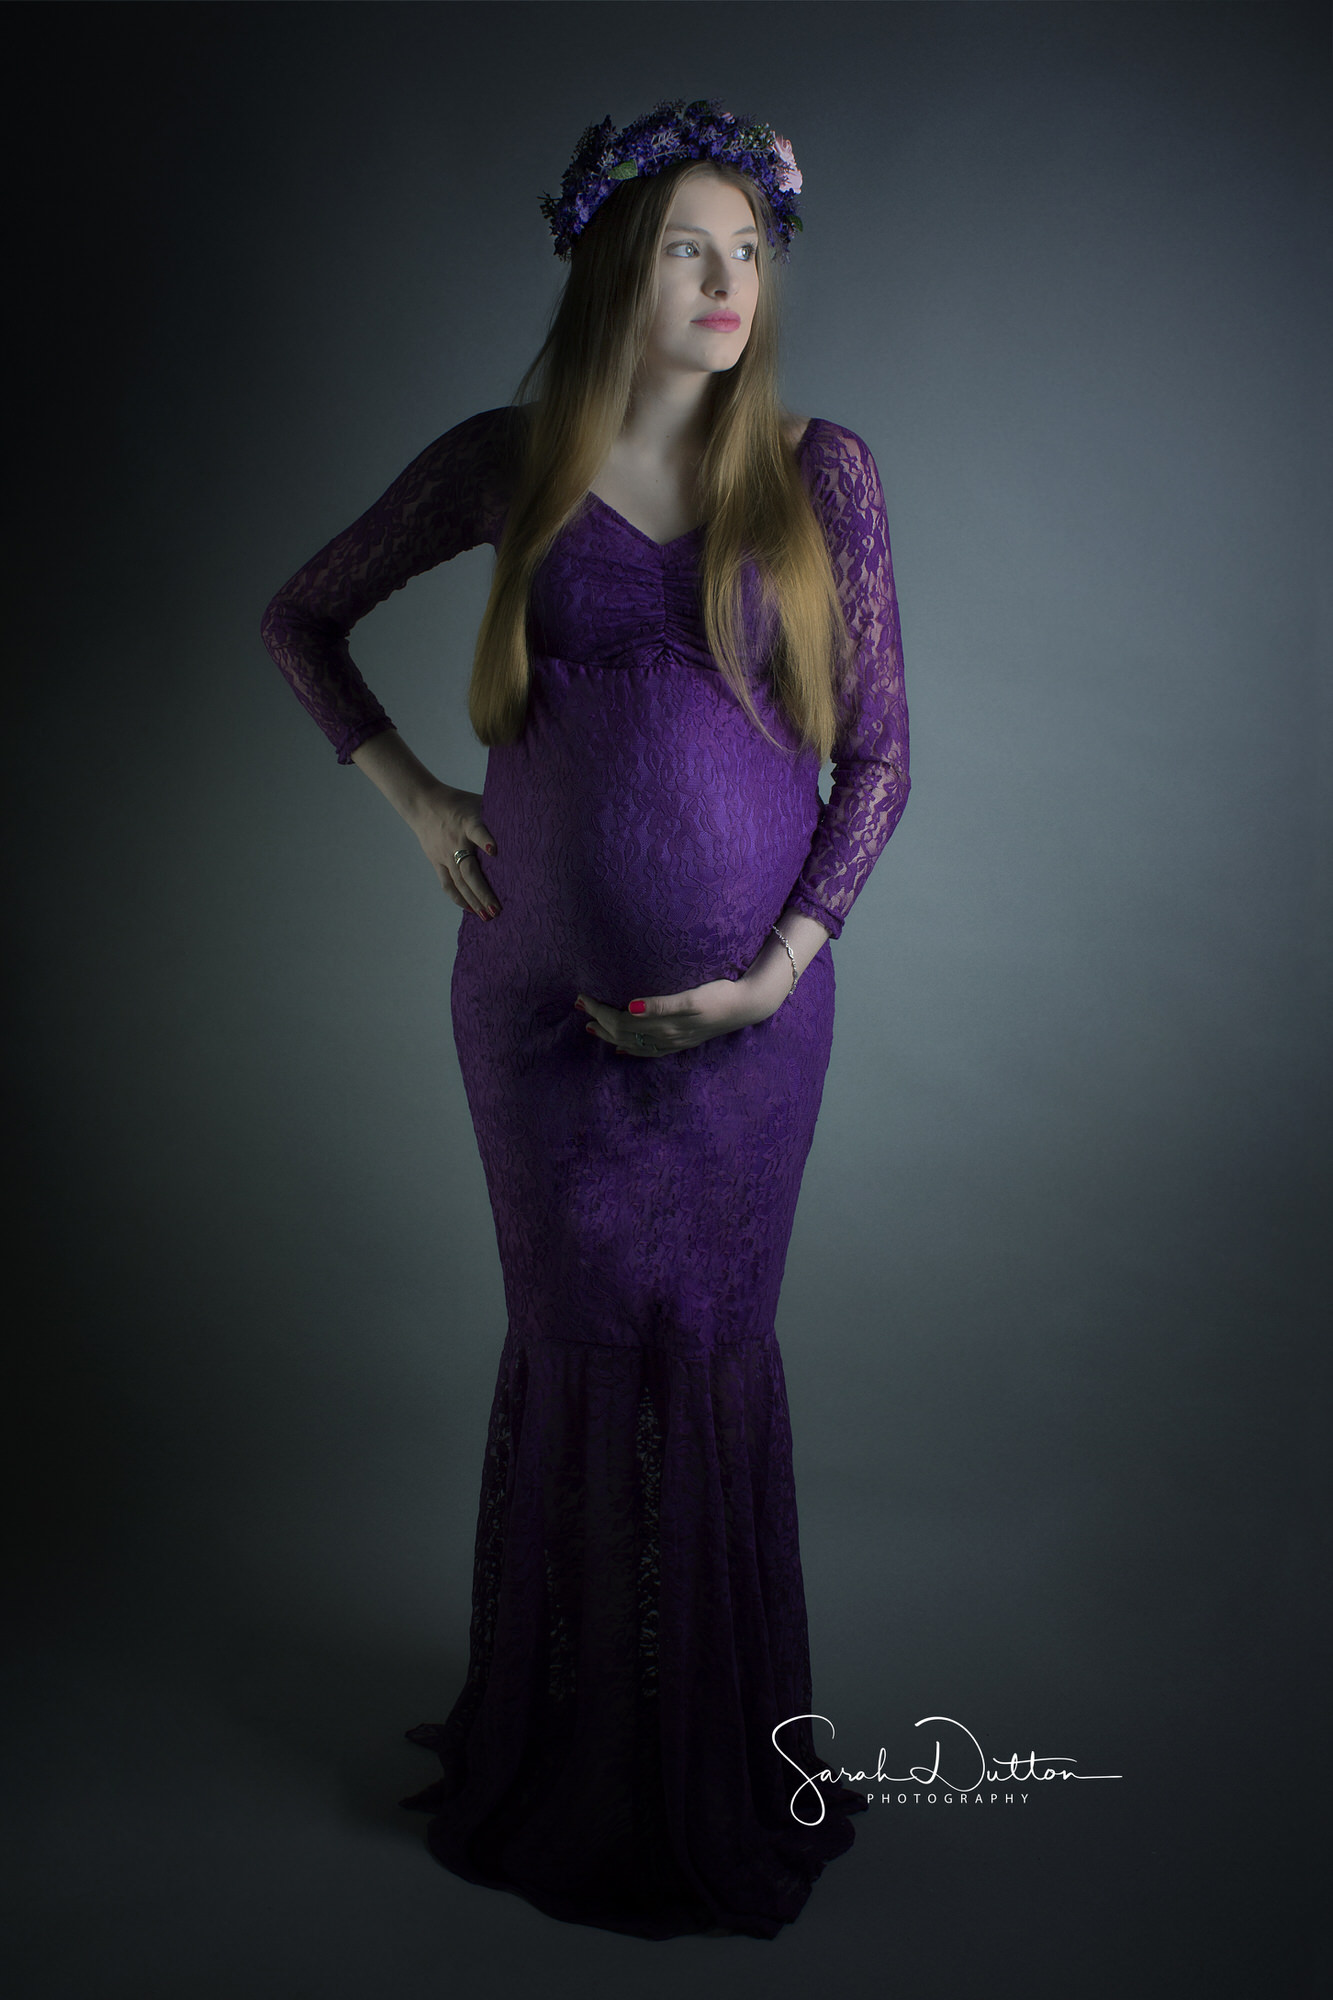 Maternity baby bump photography portrait taken at my studio in Whitchurch Hampshire